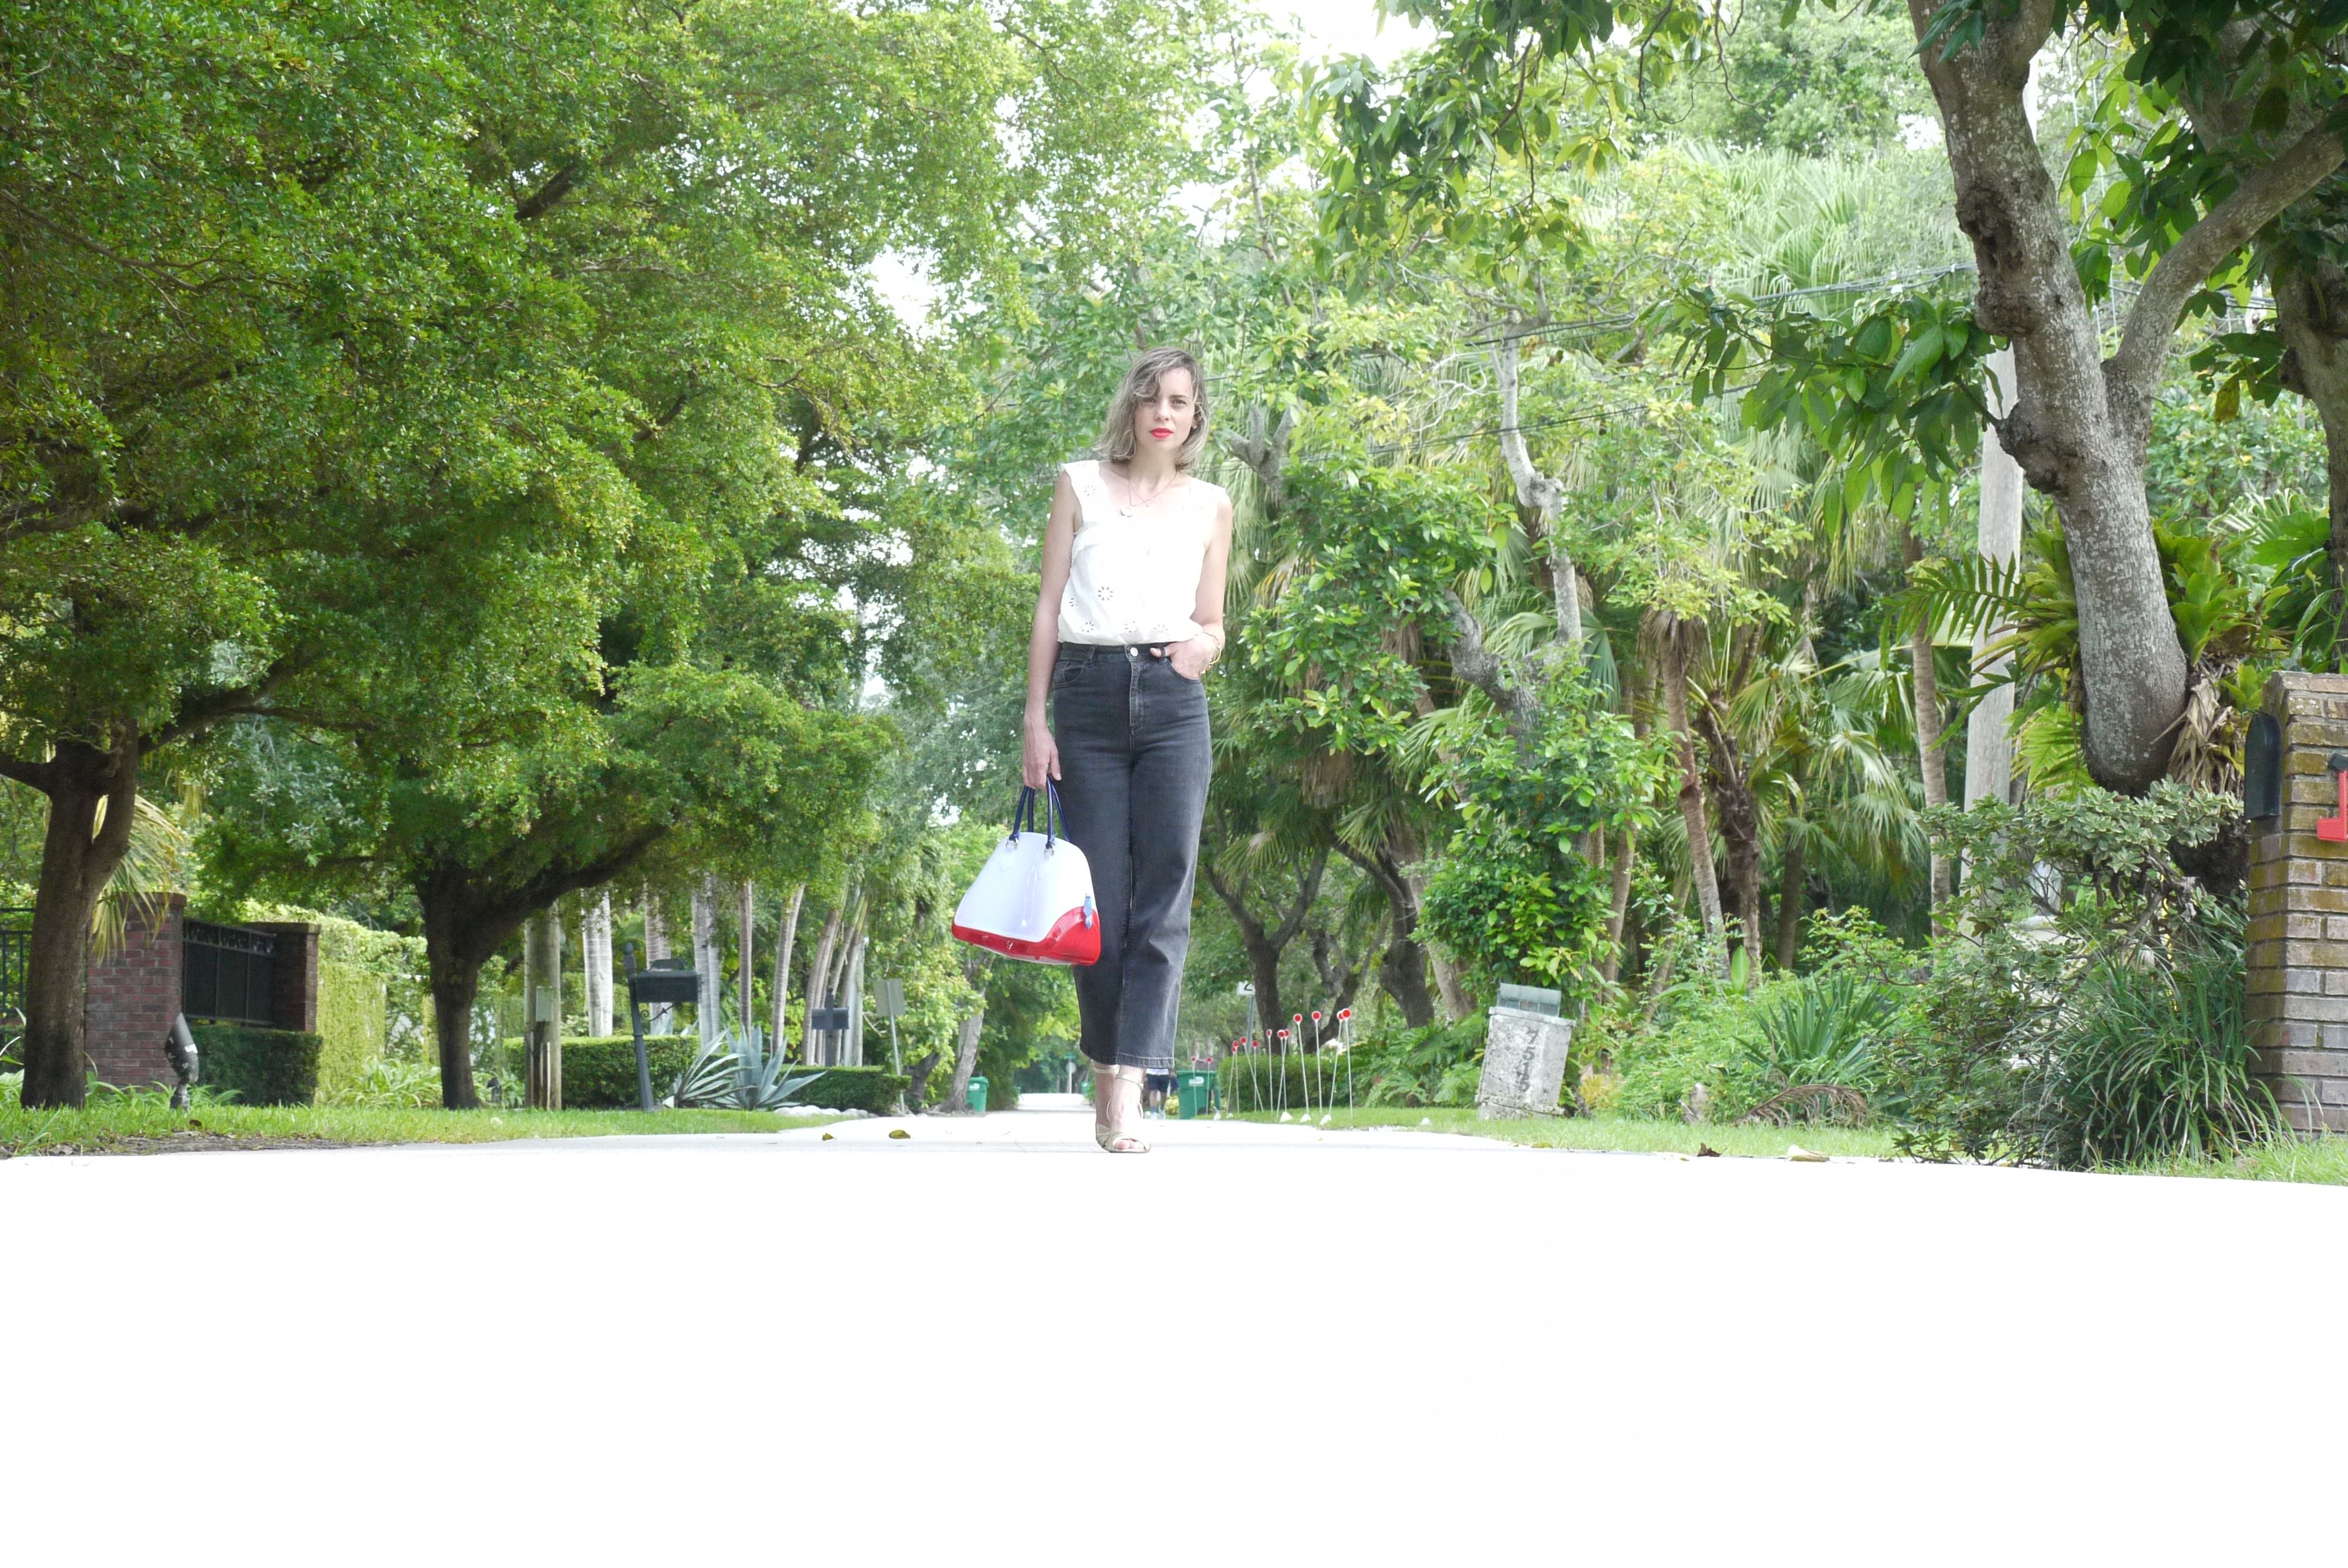 Alba Marina fashion blogger from Mylovelypeople blog shares with you how to combine a romantic white top with crop black jeans and golden sandals